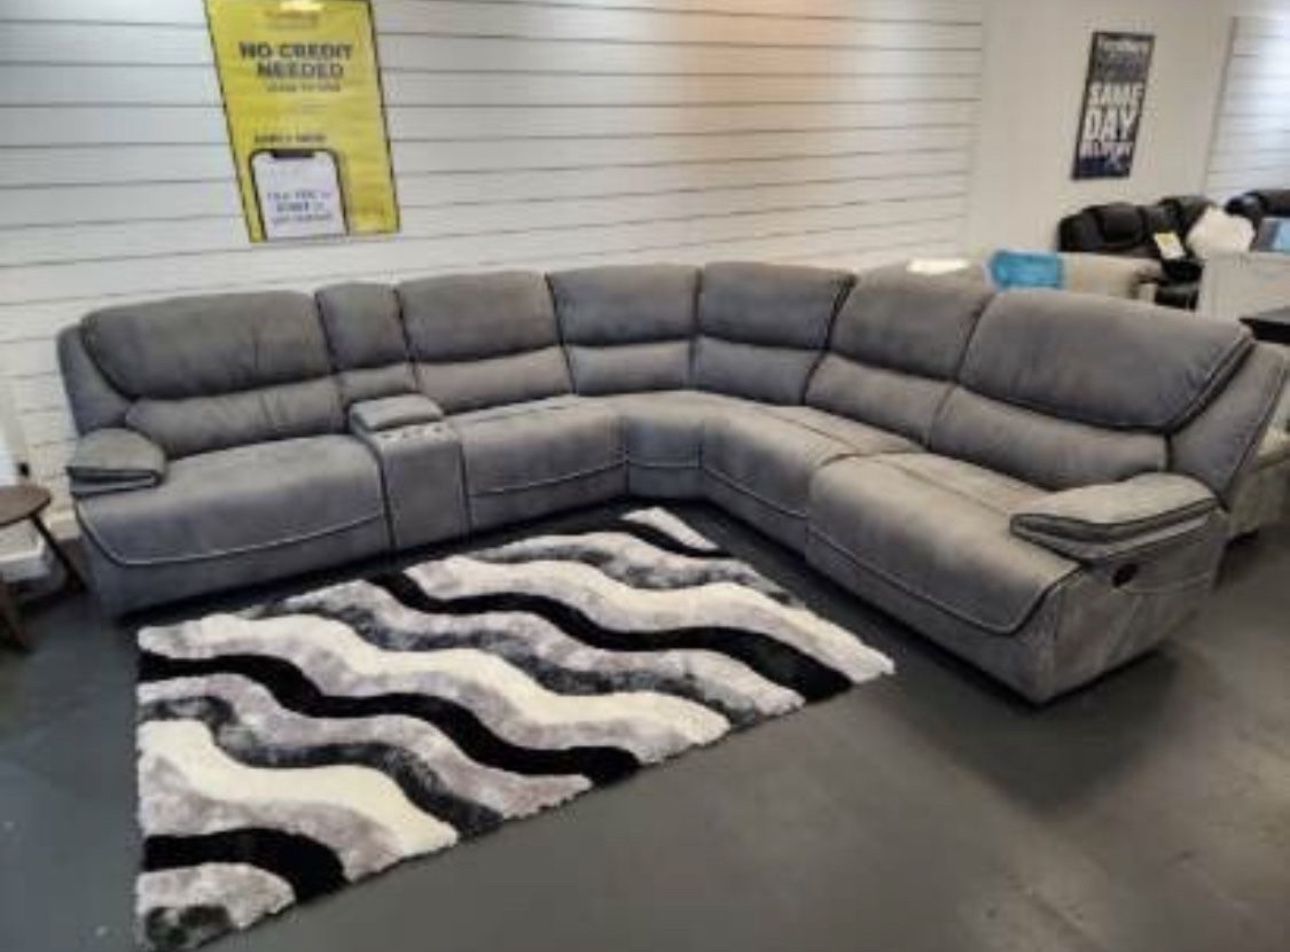 COMFY NEW ALEJANDRA RECLINING SECTIONAL SOFA ON SALE ONLY $1299. IN STOCK SAME DAY DELIVERY 🚚 EASY FINANCING CALL NOW